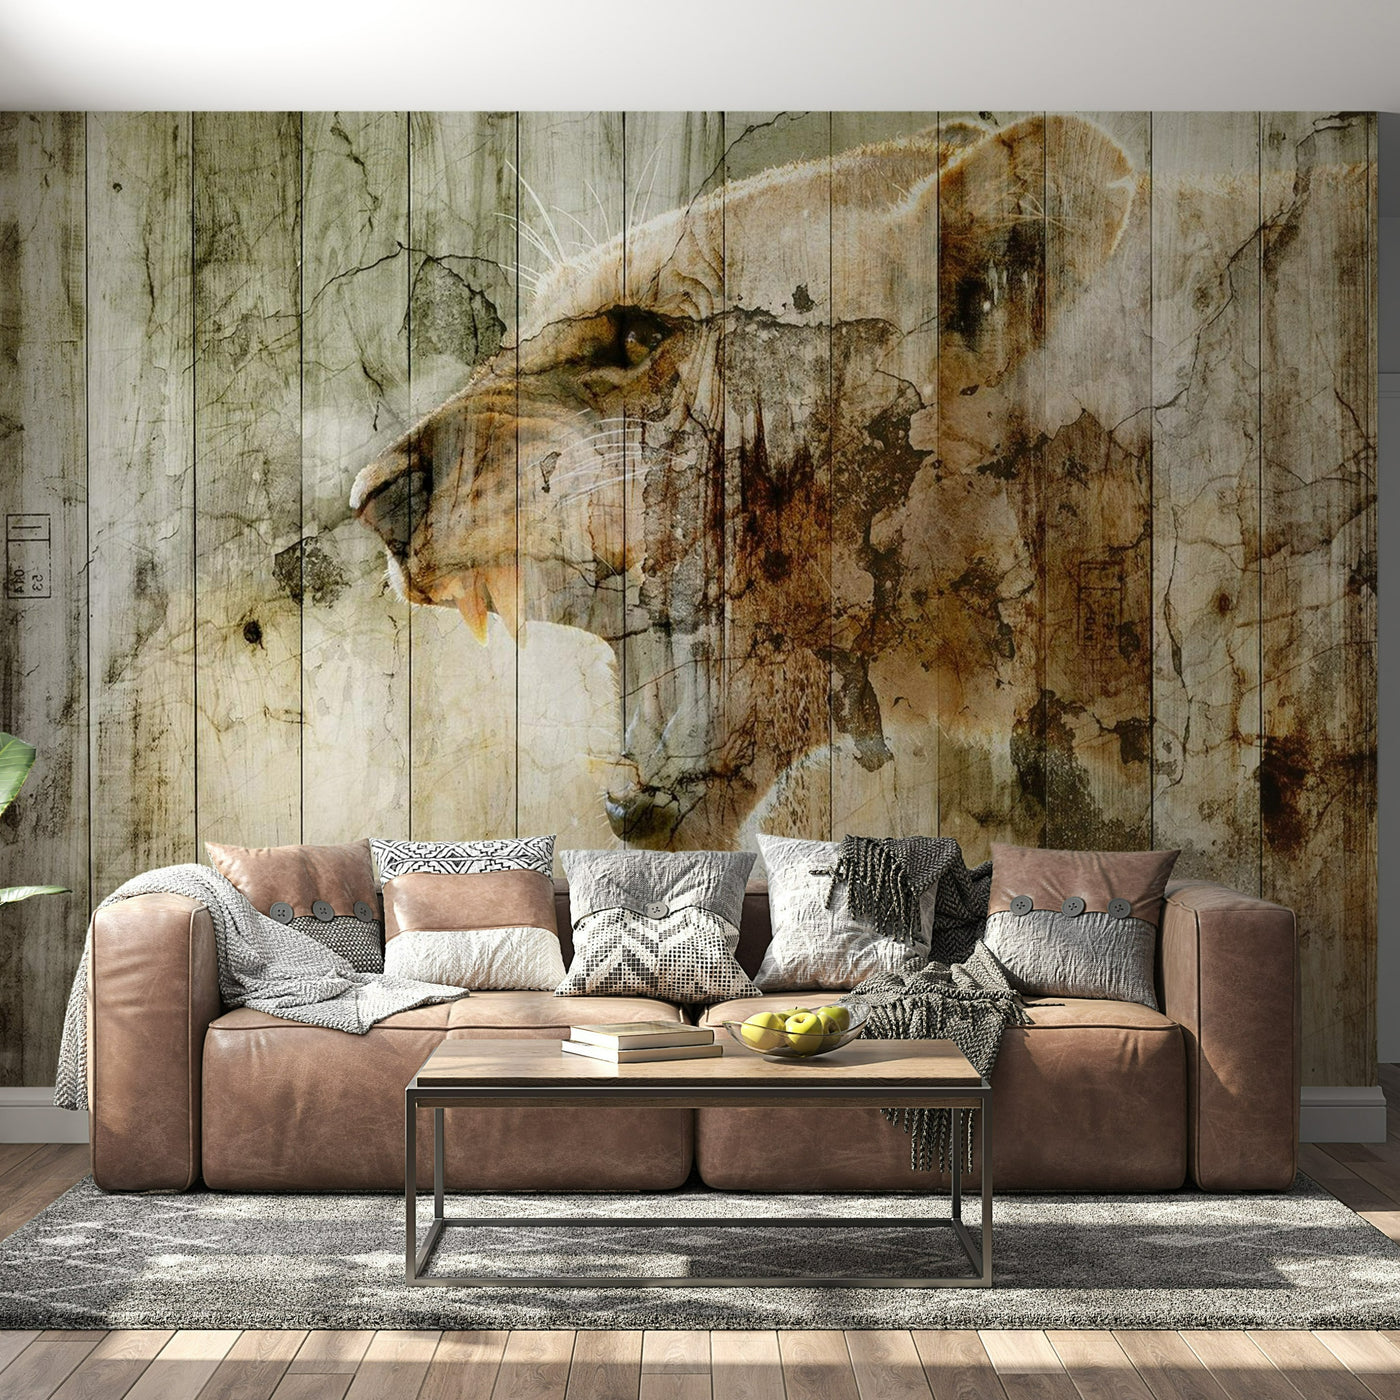 Peel & Stick Animal Wall Mural - Tiger on Distressed Wood - Removable Wall Decals